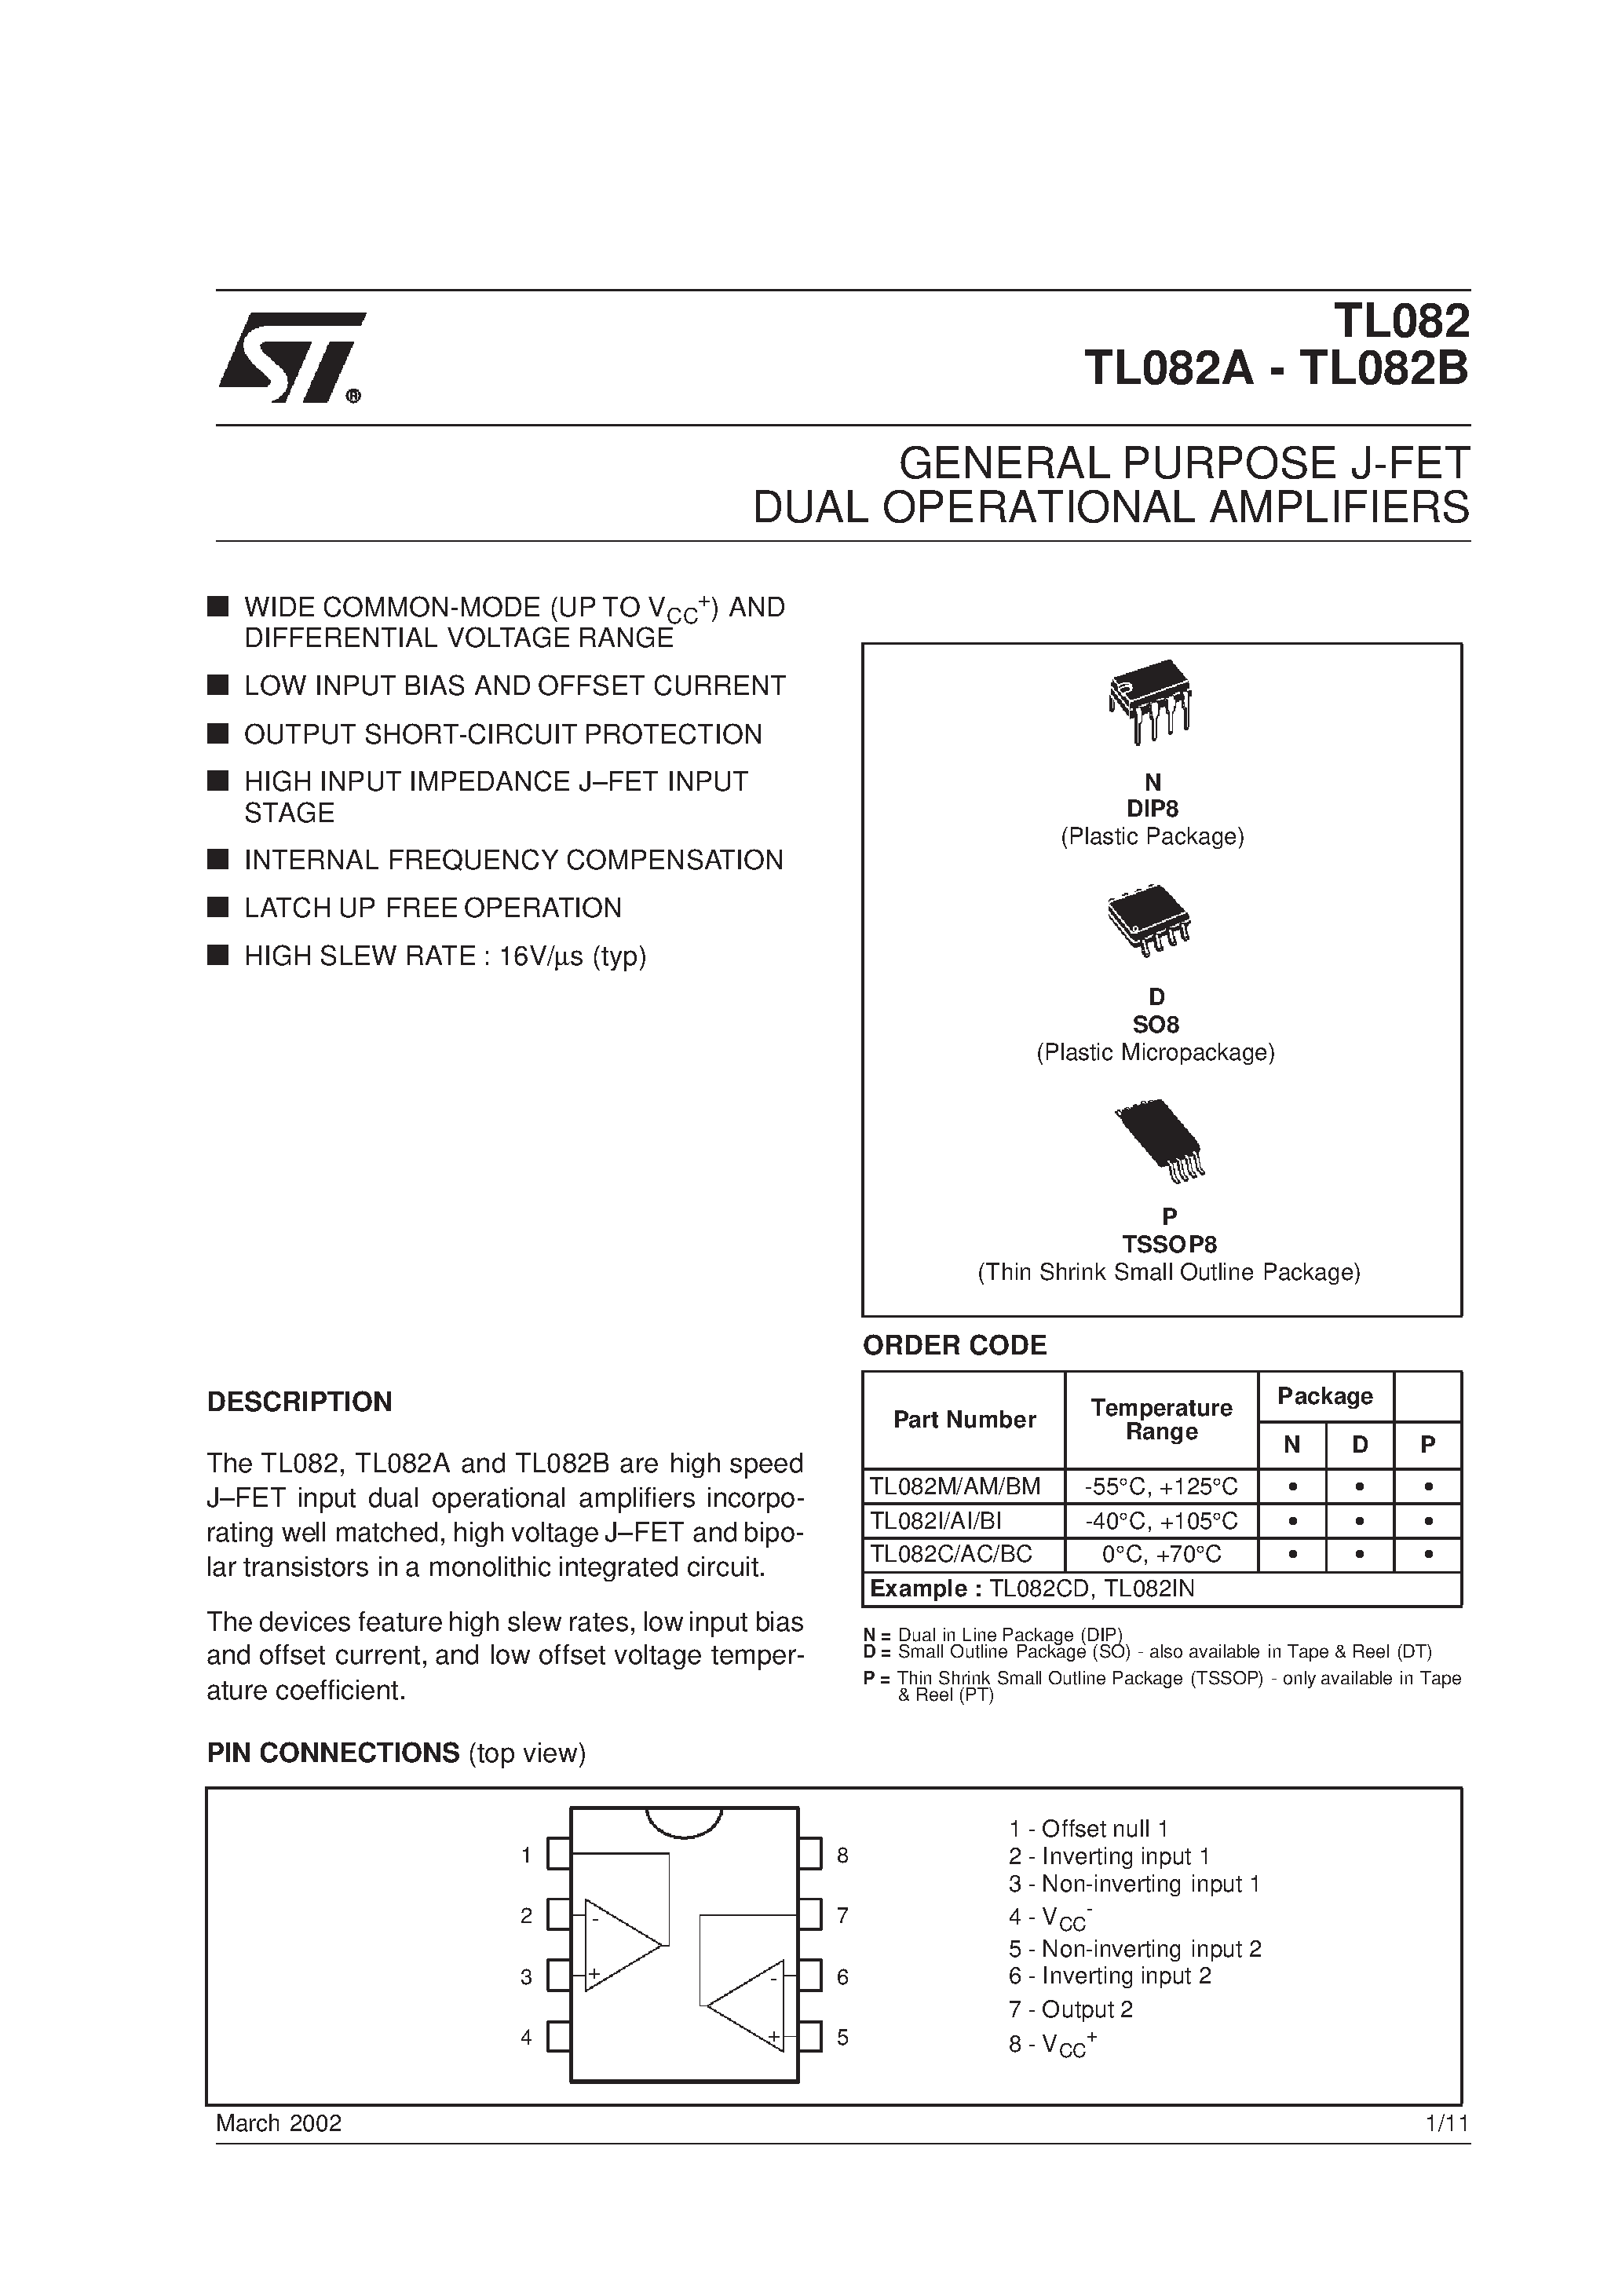 Datasheet TL082ID - GENERAL PURPOSE J-FET DUAL OPERATIONAL AMPLIFIERS page 1